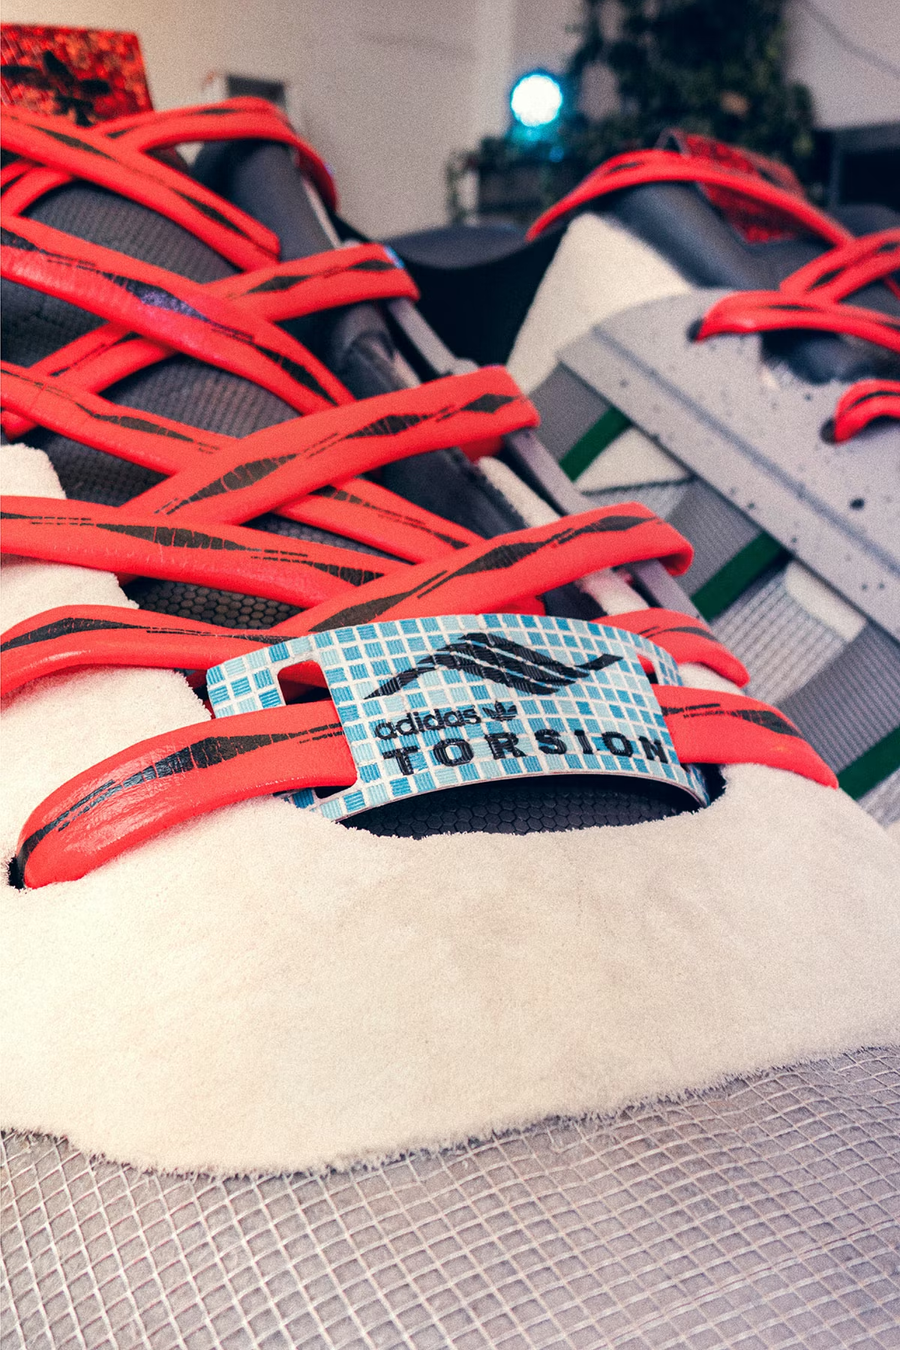 A closer look at the laces on the Hornbach sneaker pool, meant to replicated a pair of Adidas ZX 10000s.